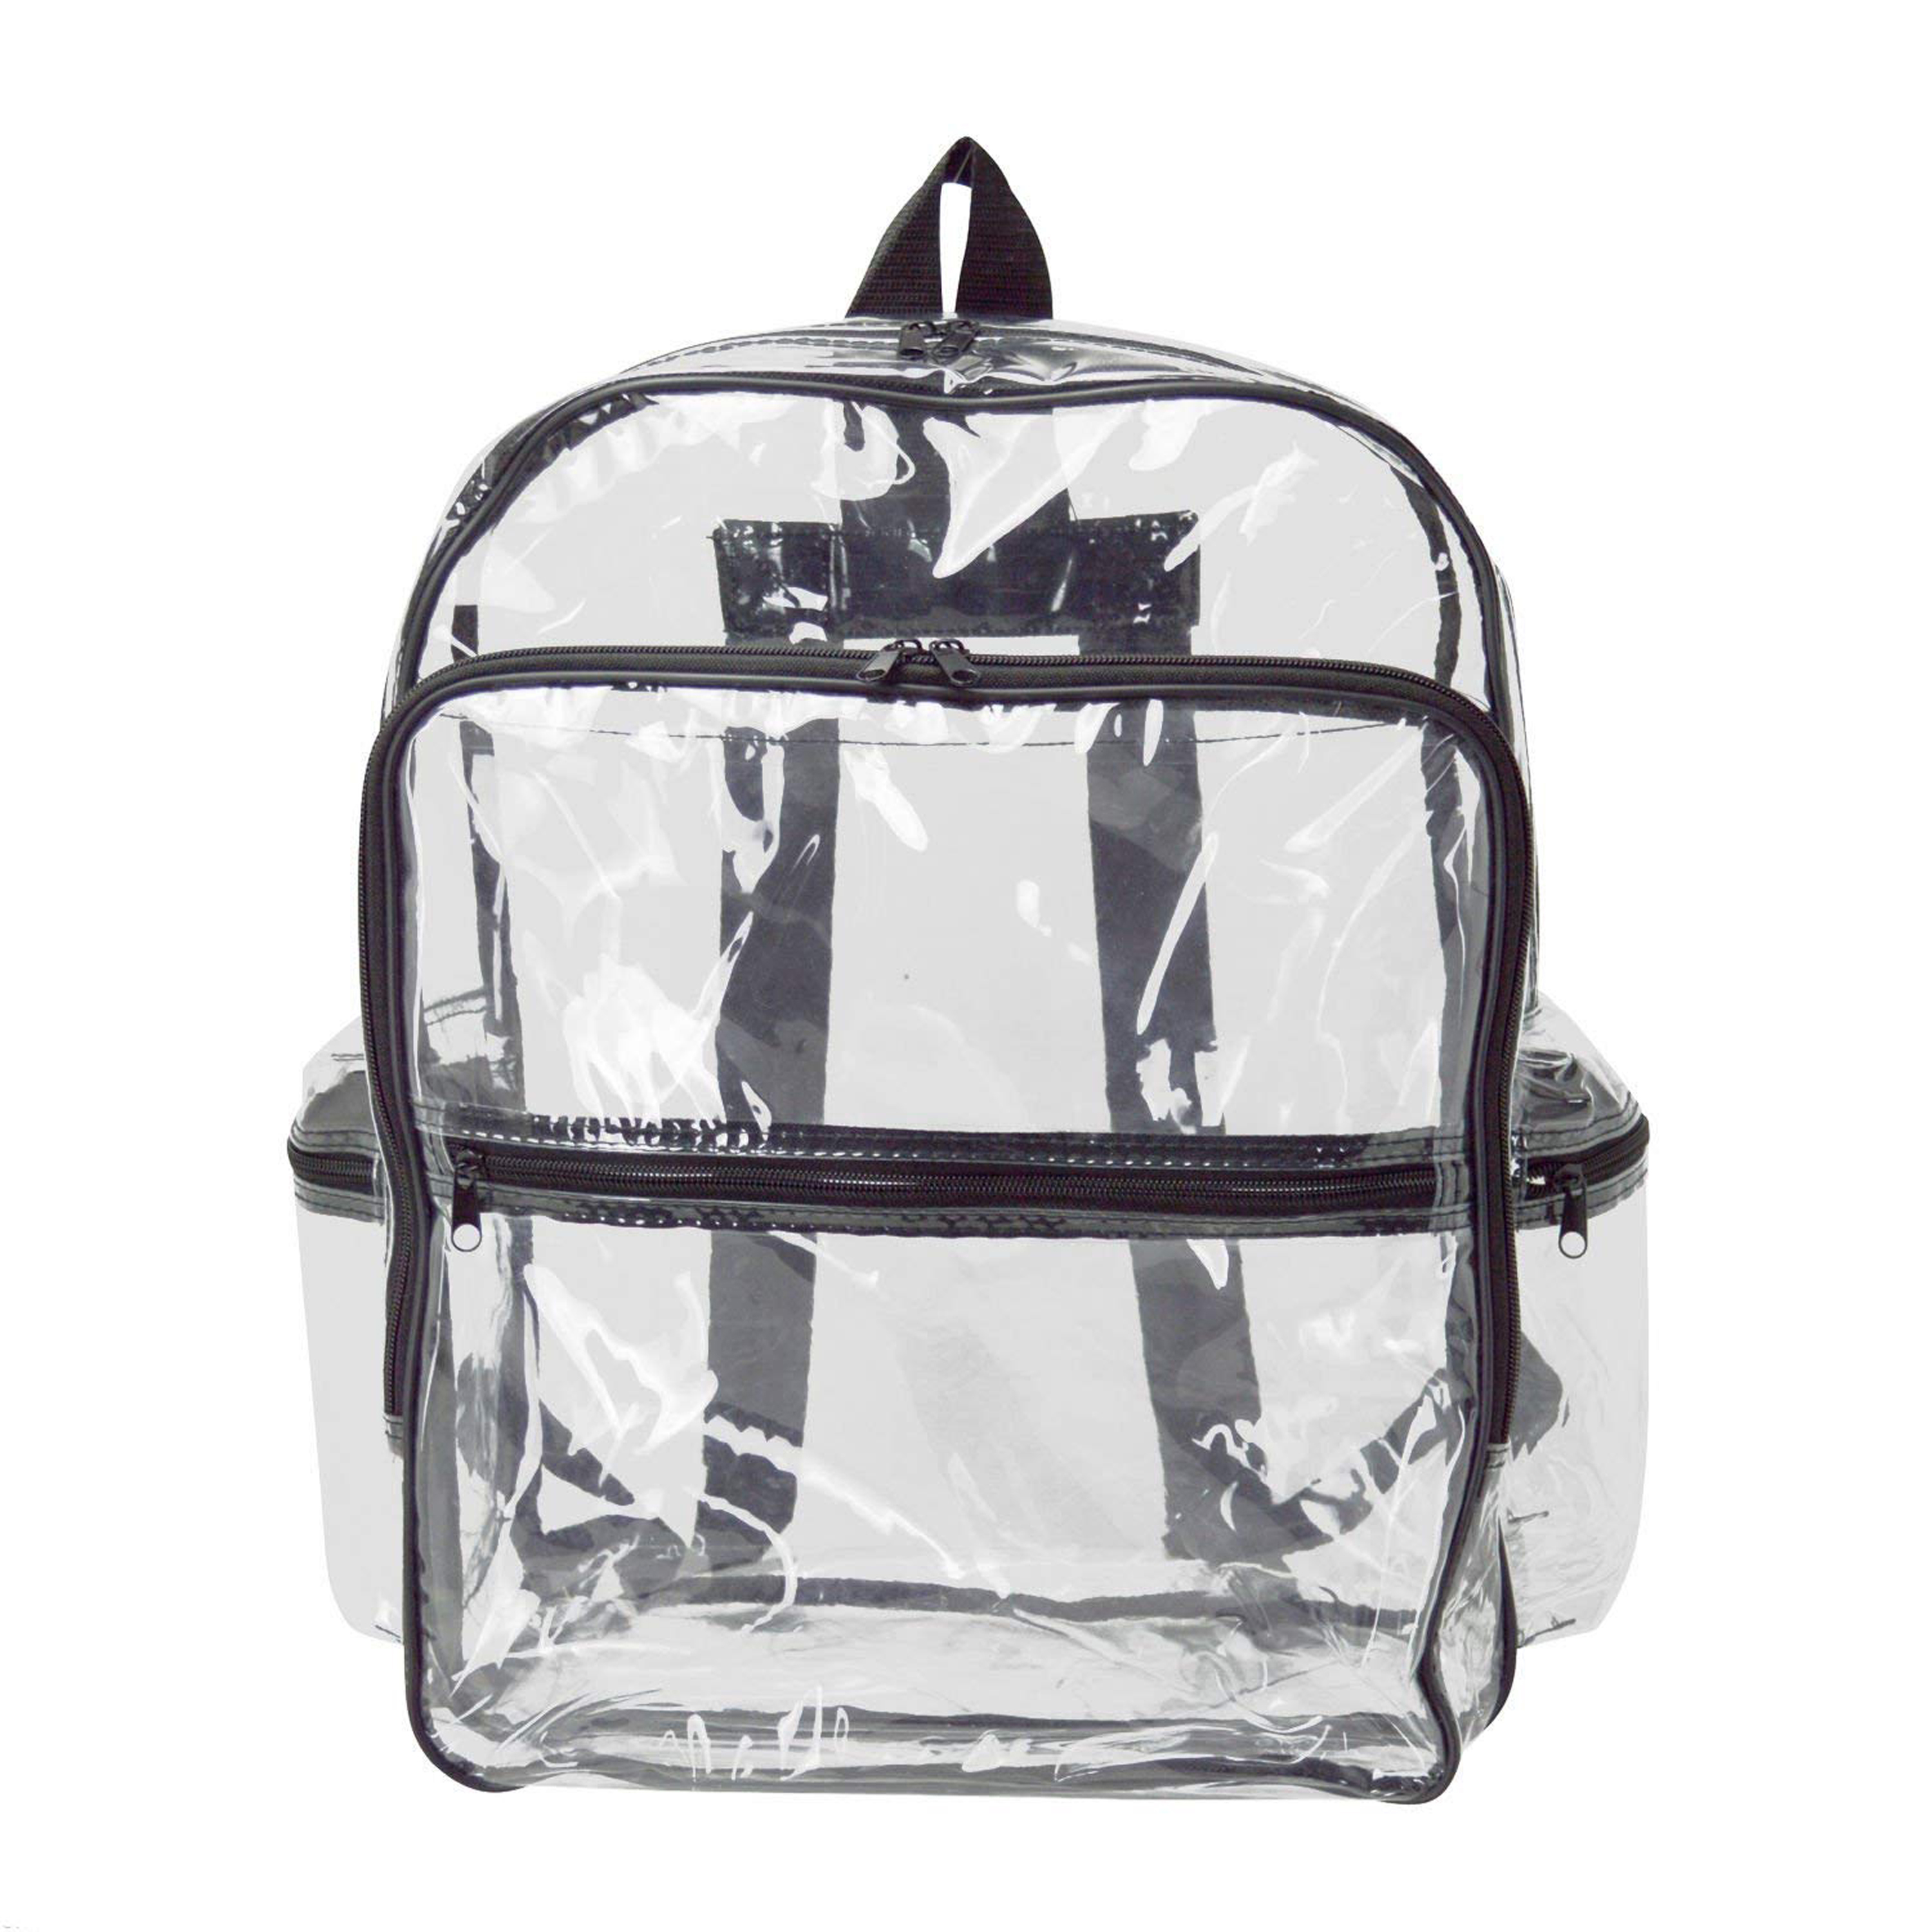 ImpecGear Kid's Clear Backpack, Adults School Clear Backpack, Outdoor Transparent Backpacks. - image 2 of 5